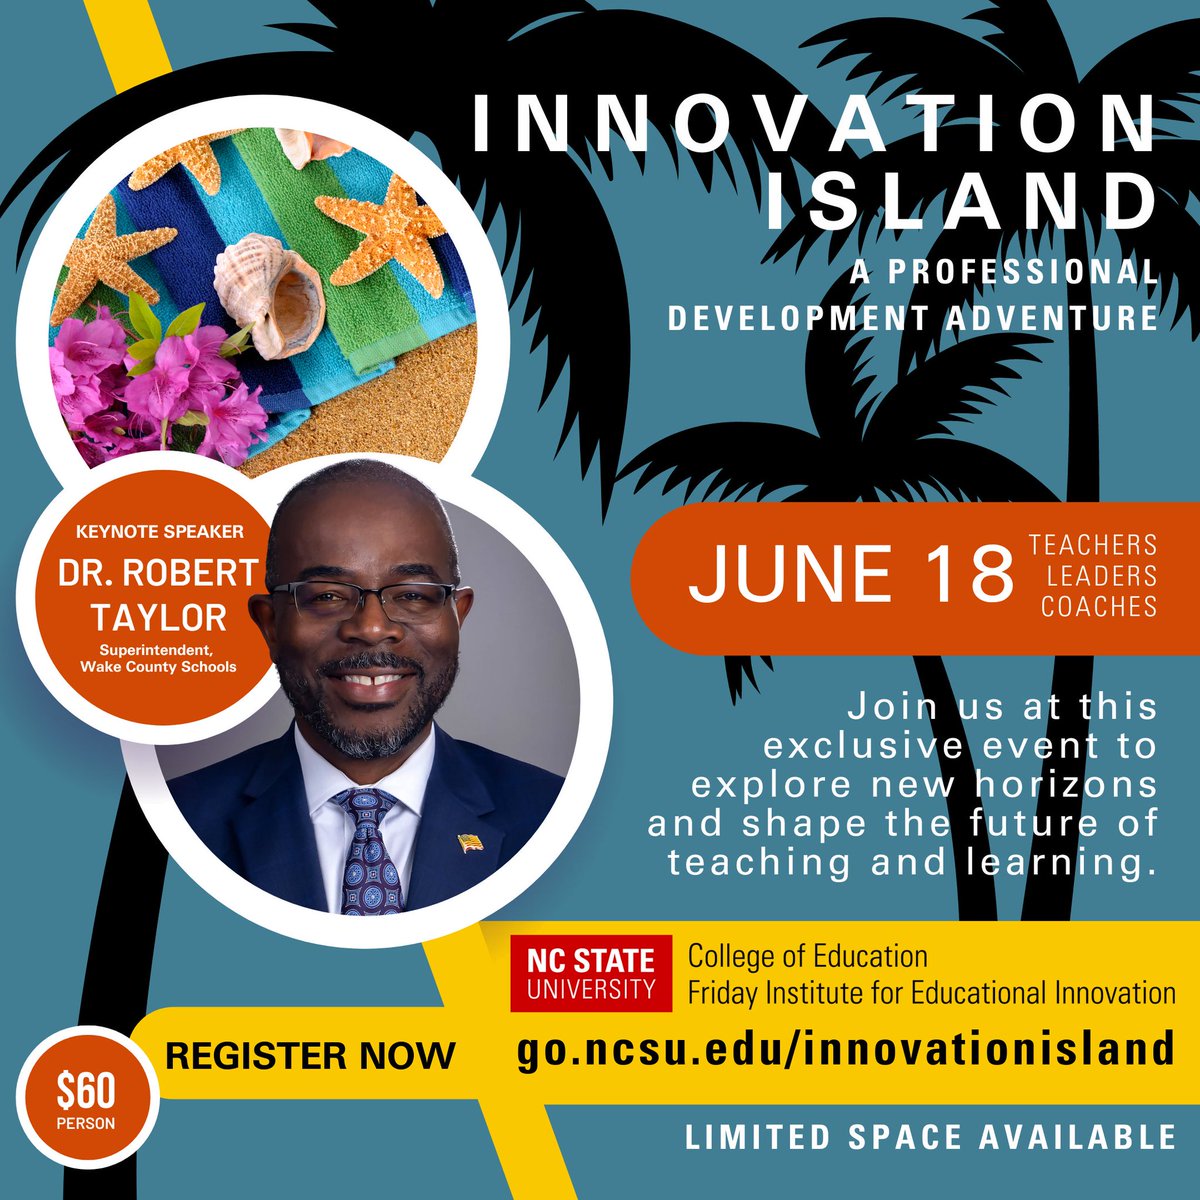 Dive into a day of discovery at @FridayInstitute's Innovation Island! Join fellow educators on June 18 for an immersive professional development experience, including a keynote from @WCPSS Superintendent Dr. Robert Taylor. Register now: go.ncsu.edu/innovationisla… @4LifeEducator